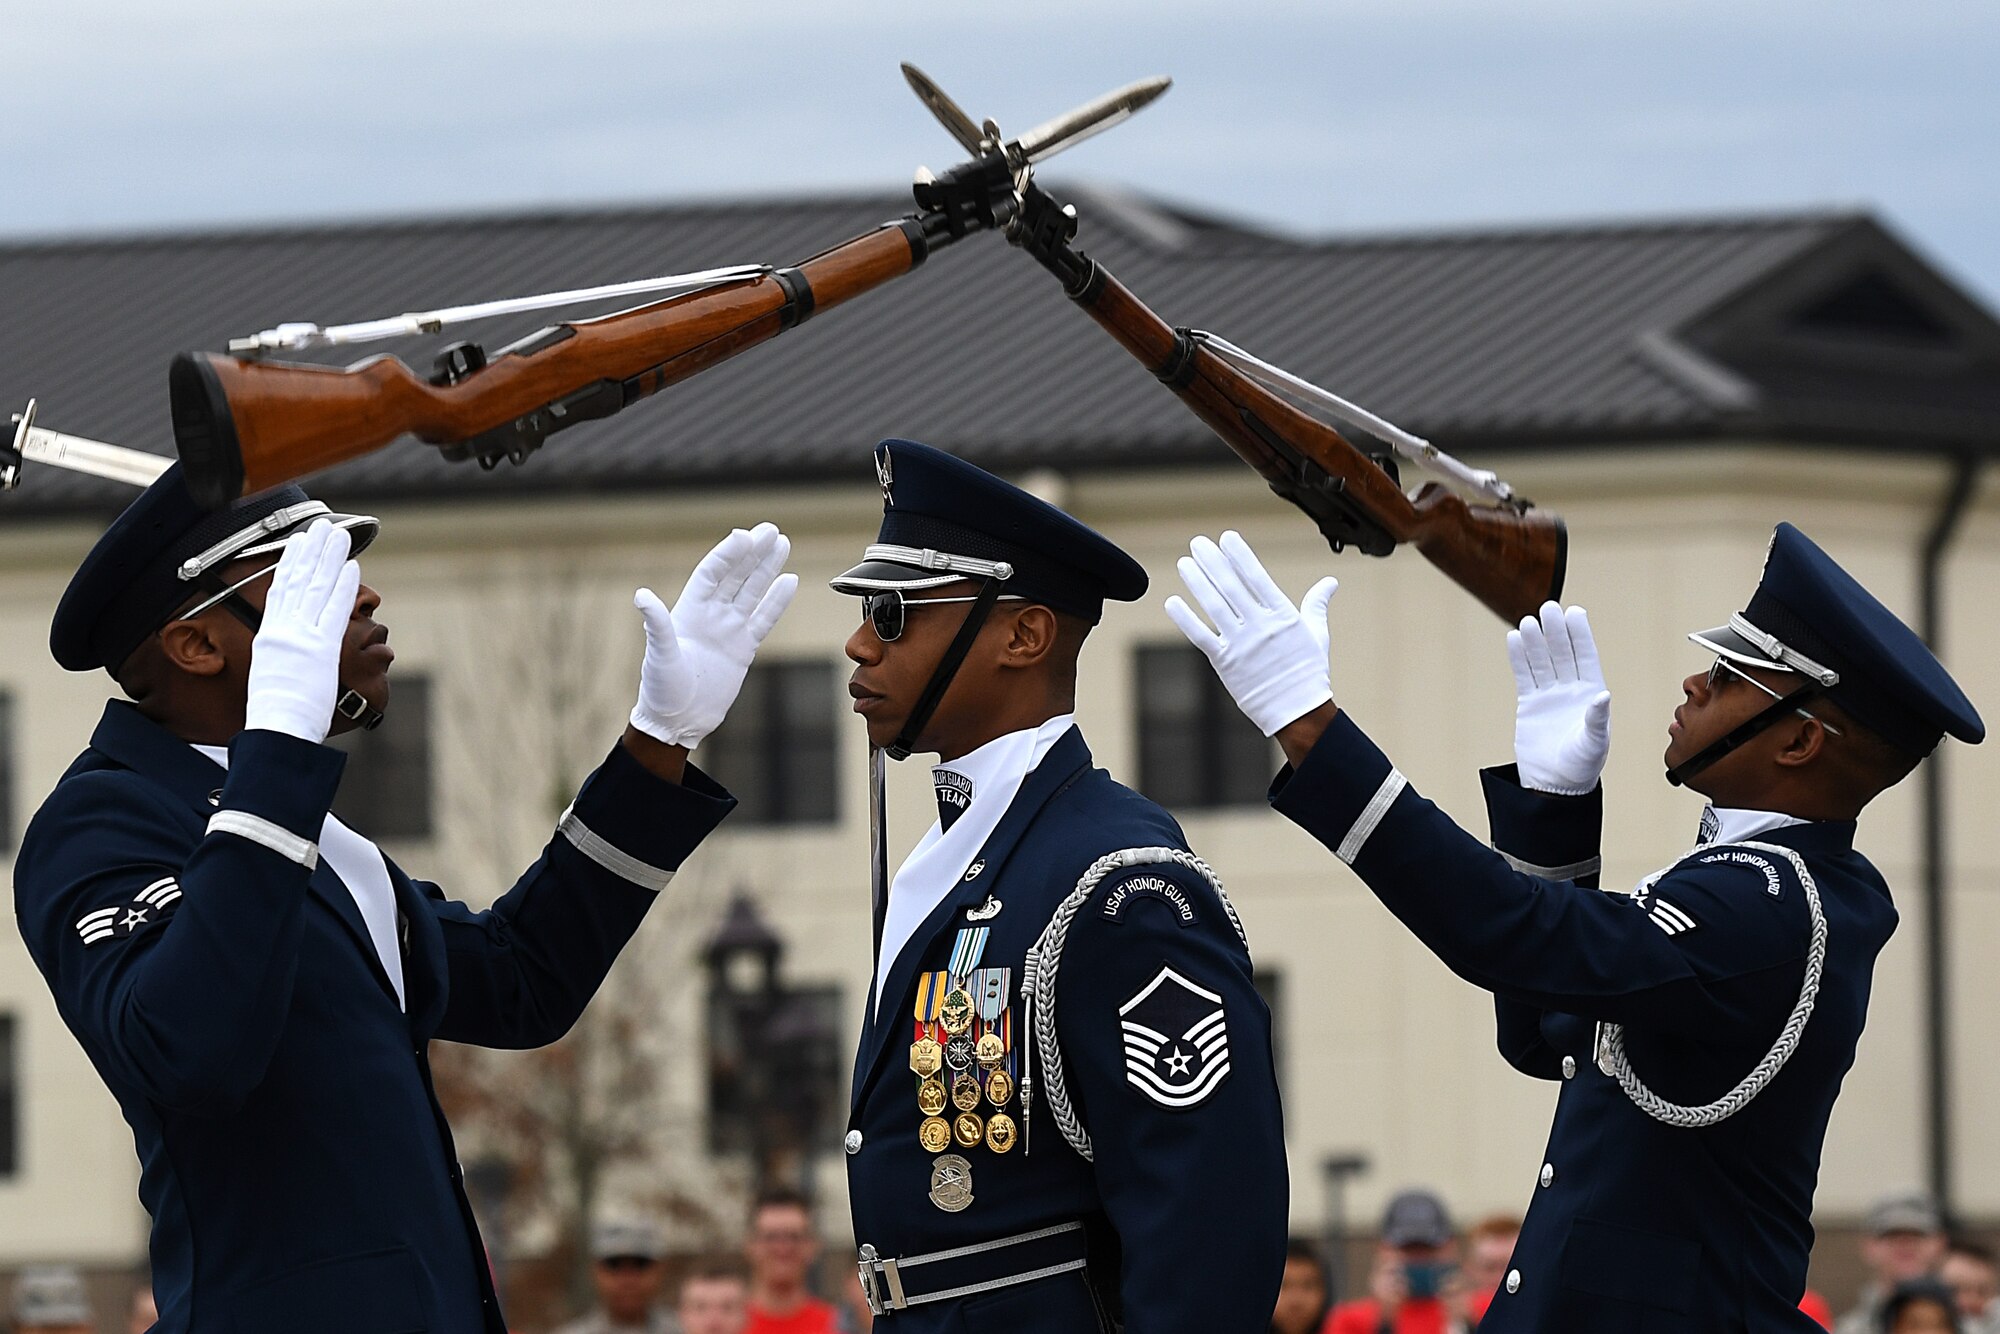 U.S. Air Force Senior Airman Bryan Satterlee, U.S. Air Force Honor Guard Drill Team member, Master Sgt. Jason Prophet, U.S. Air Force Honor Guard Drill Team superintendent, and Senior Airman Darren Lawrence, U.S. Air Force Honor Guard Drill Team member, participate in the debut of their 2019 routine in front of Keesler leadership and 81st Training Group Airmen on the Levitow Training Support Facility drill pad at Keesler Air Force Base, Mississippi, Feb. 8, 2019. The team comes to Keesler every year for five weeks to develop a new routine that they will use throughout the year. (U.S. Air Force photo by Airman 1st Class Suzie Plotnikov)